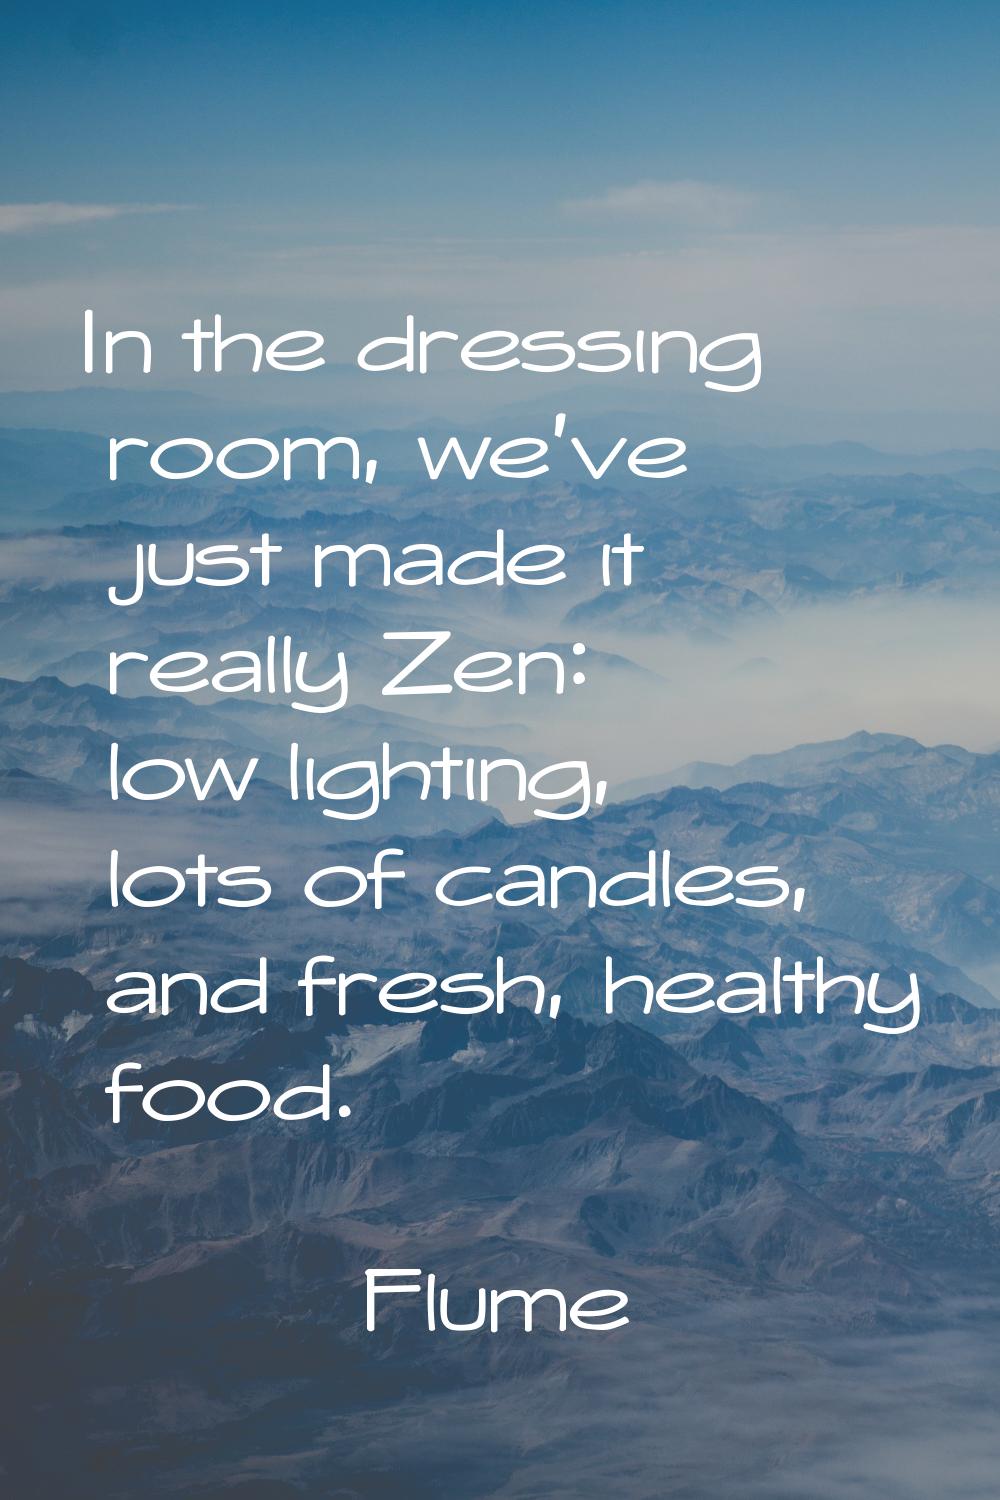 In the dressing room, we've just made it really Zen: low lighting, lots of candles, and fresh, heal